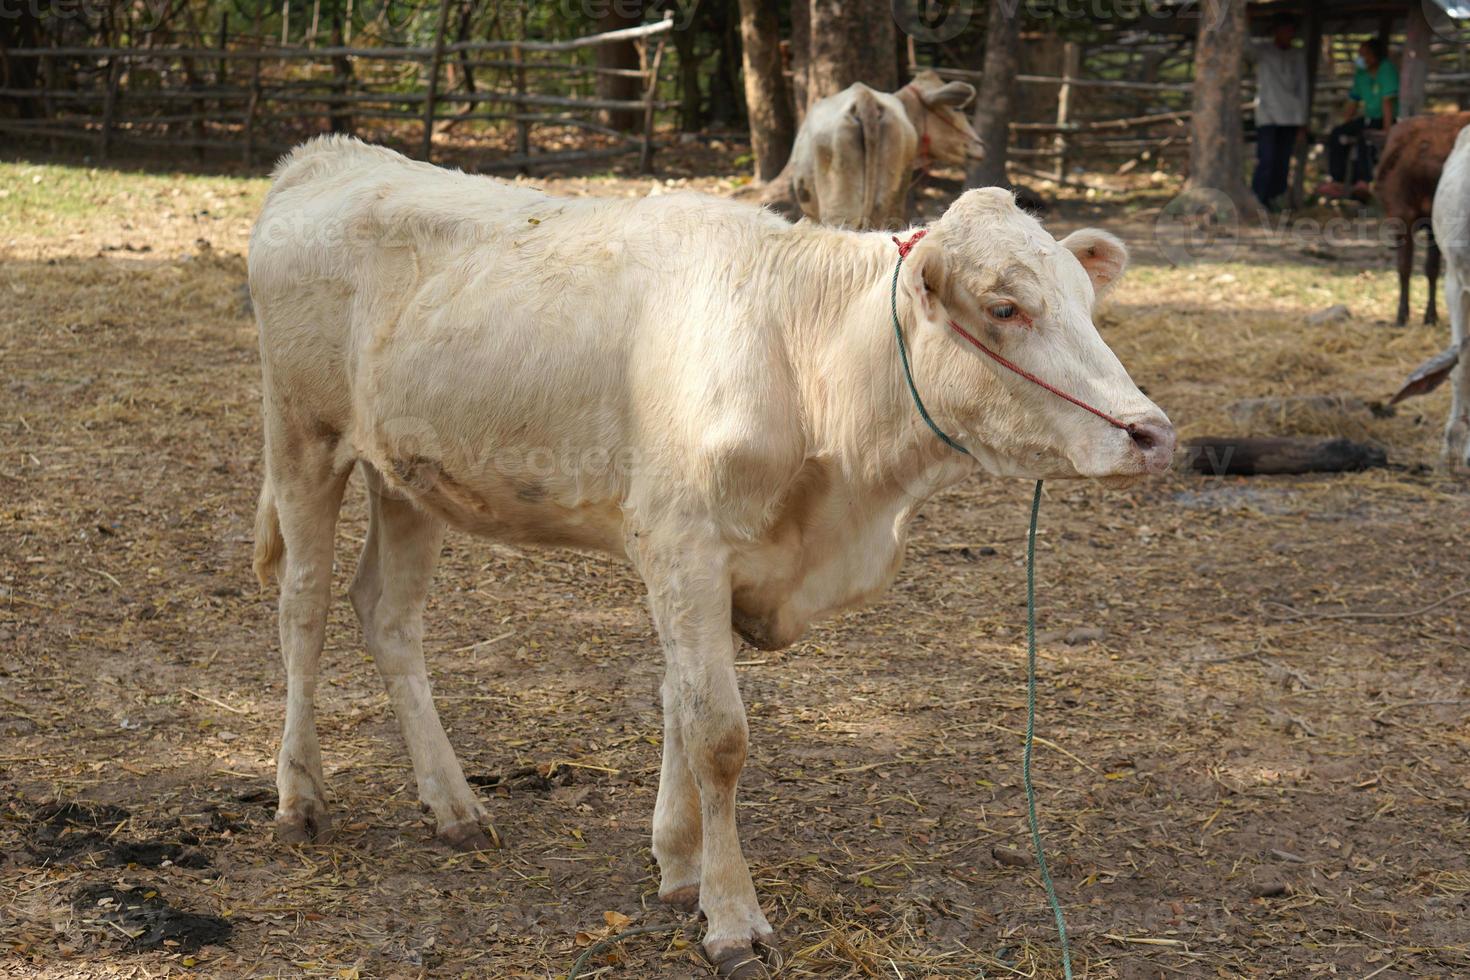 cows were brought by their owners to be sold at the market. photo